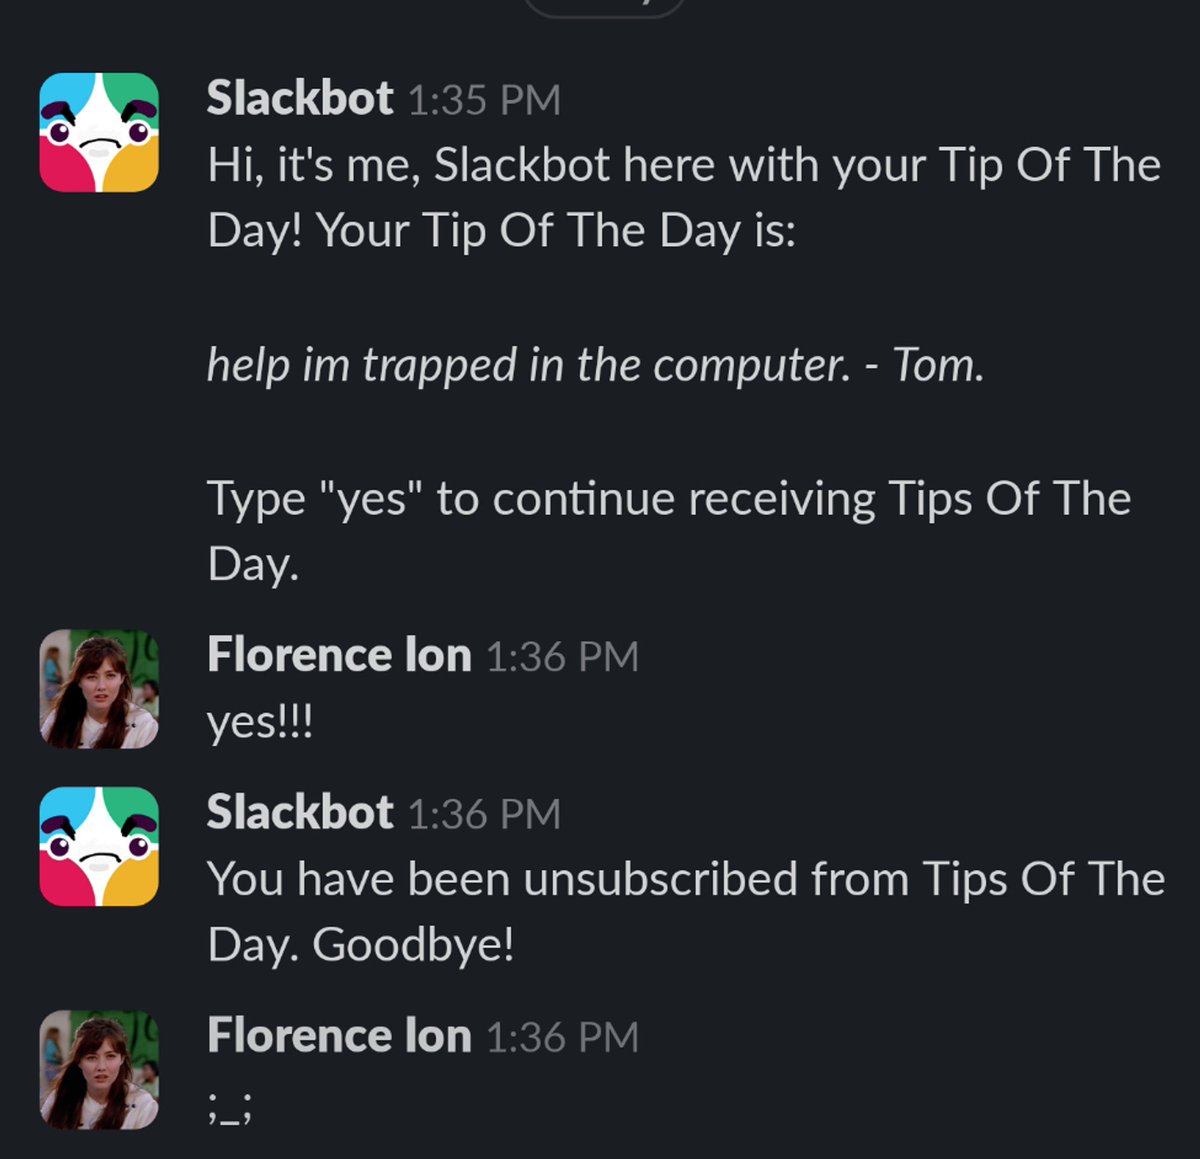 it's been long enough for me to admit publicly that when i left Gizmodo in 2022 I changed my Slack username to 'SIackbot' and G/O Media failed to detect or delete it for months